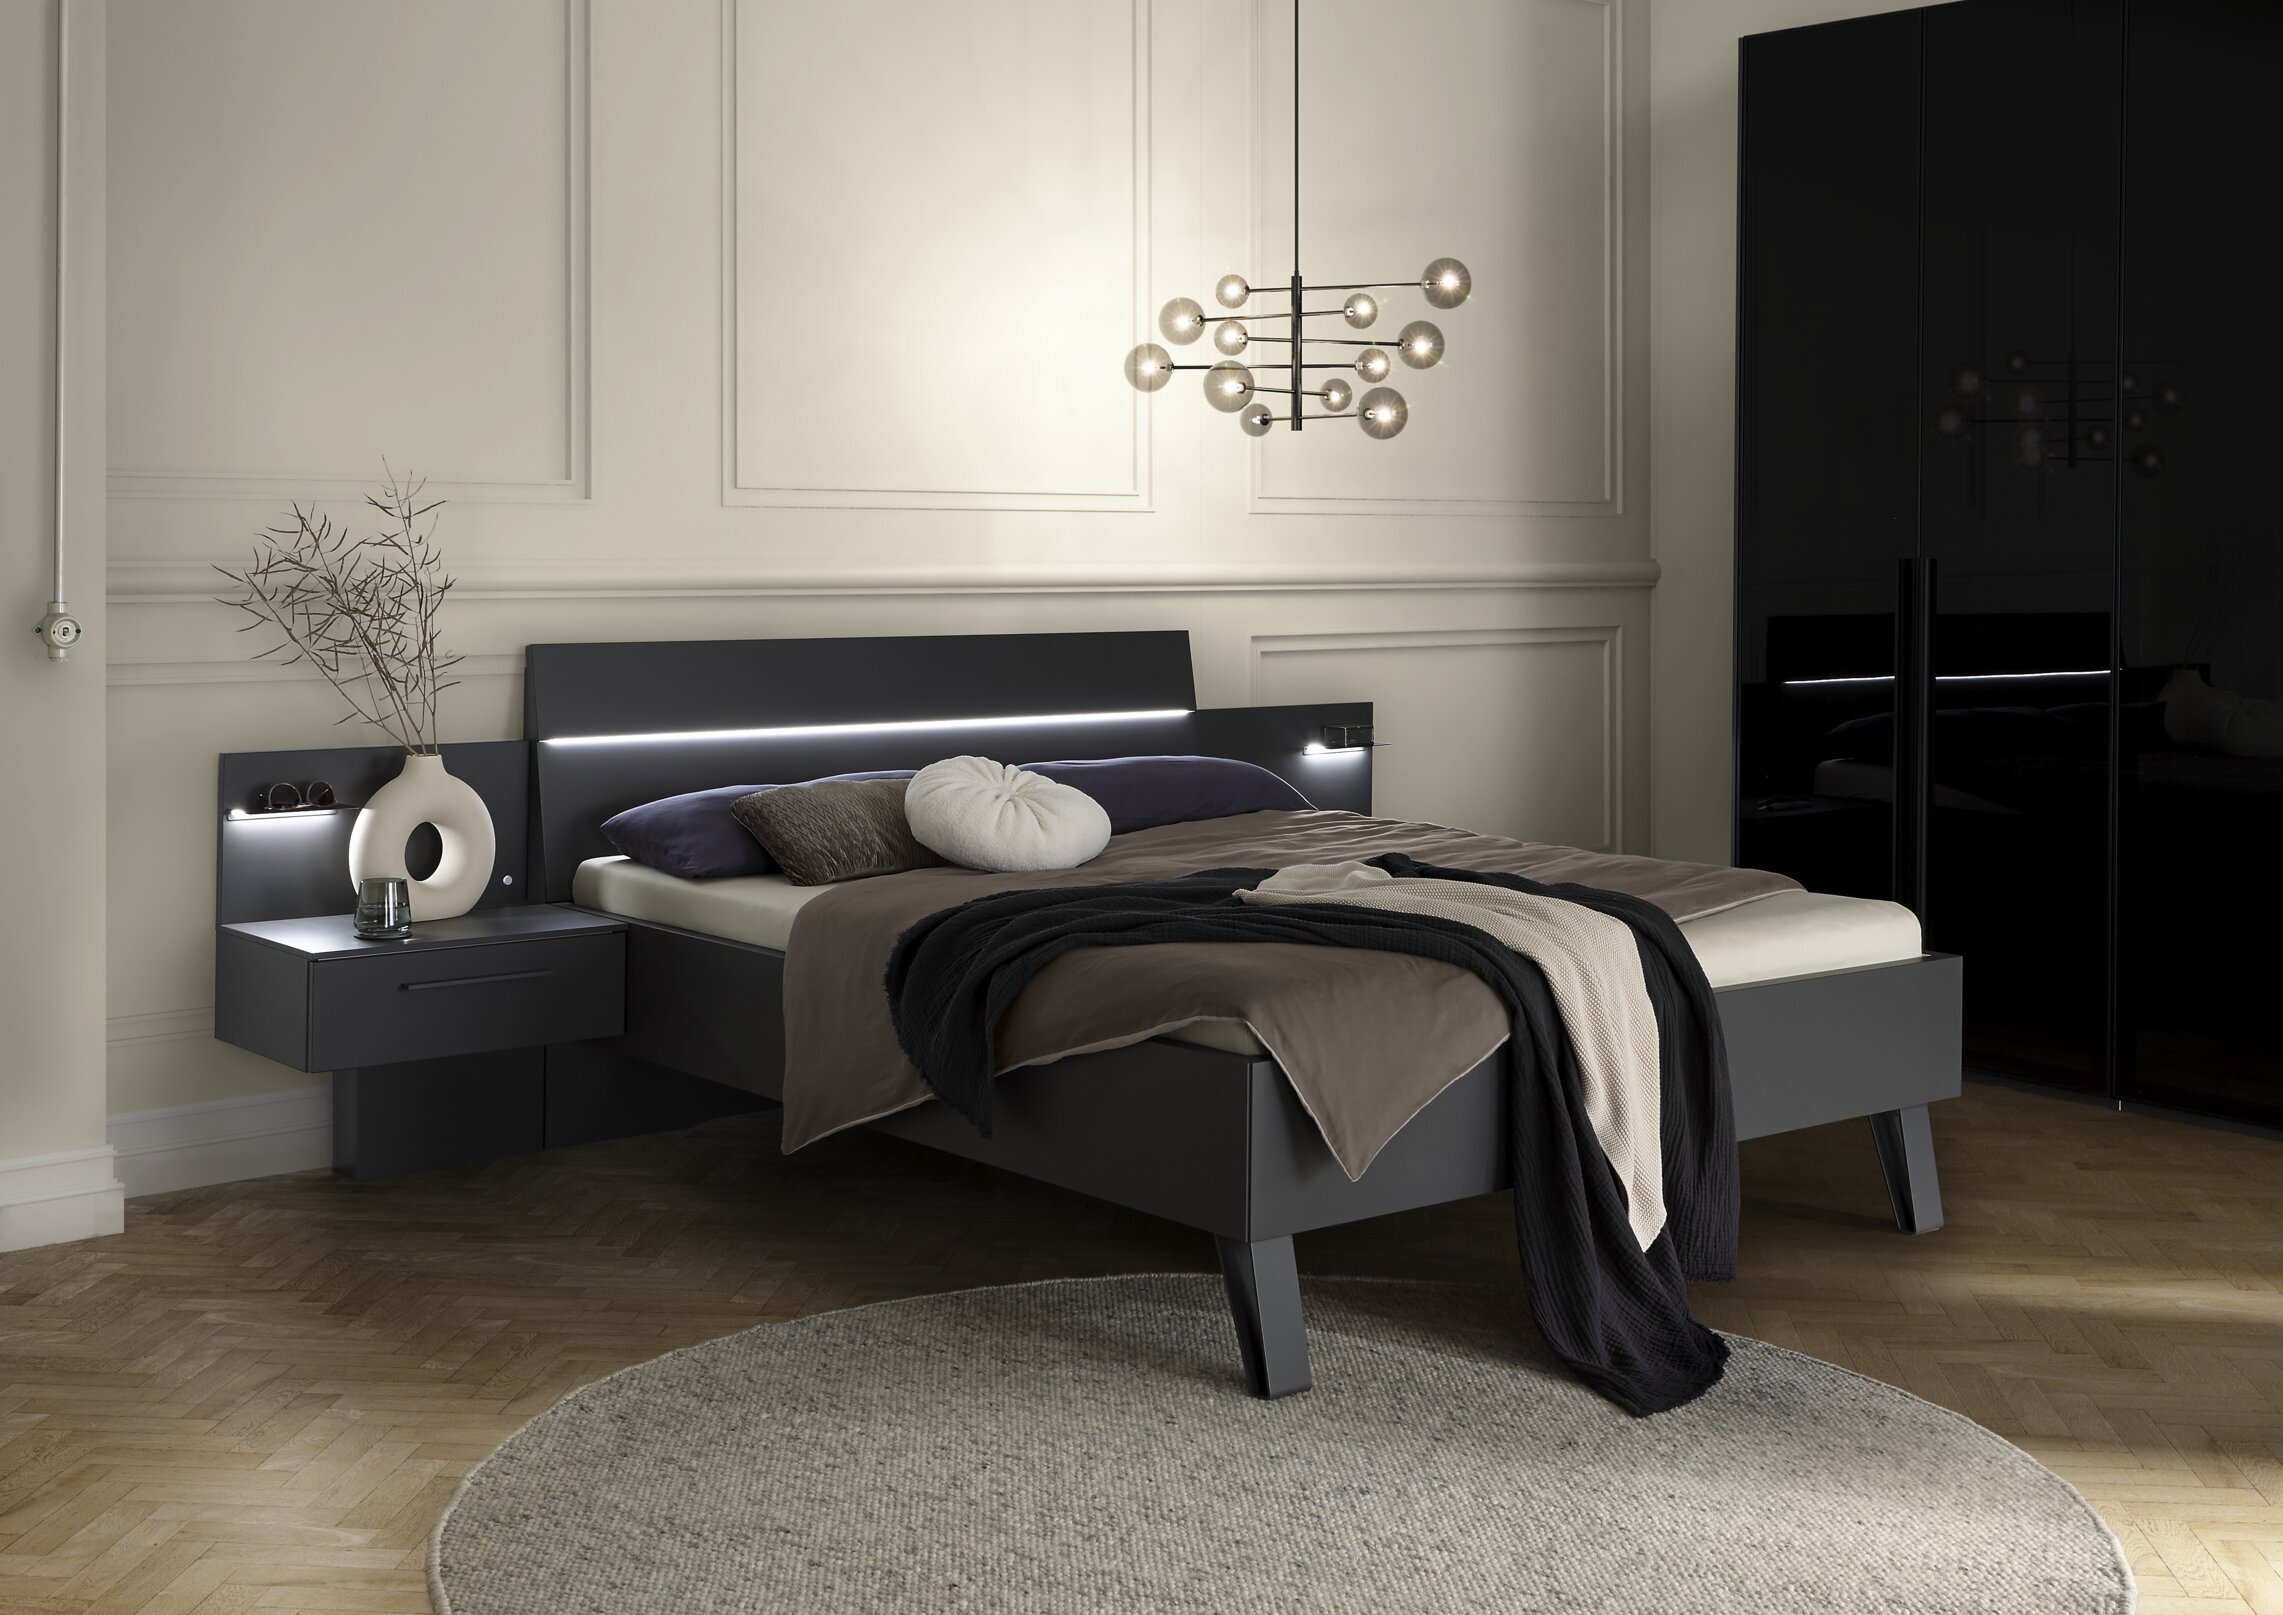 Bedrooms ma XX Shale grey lacquer 03 AM